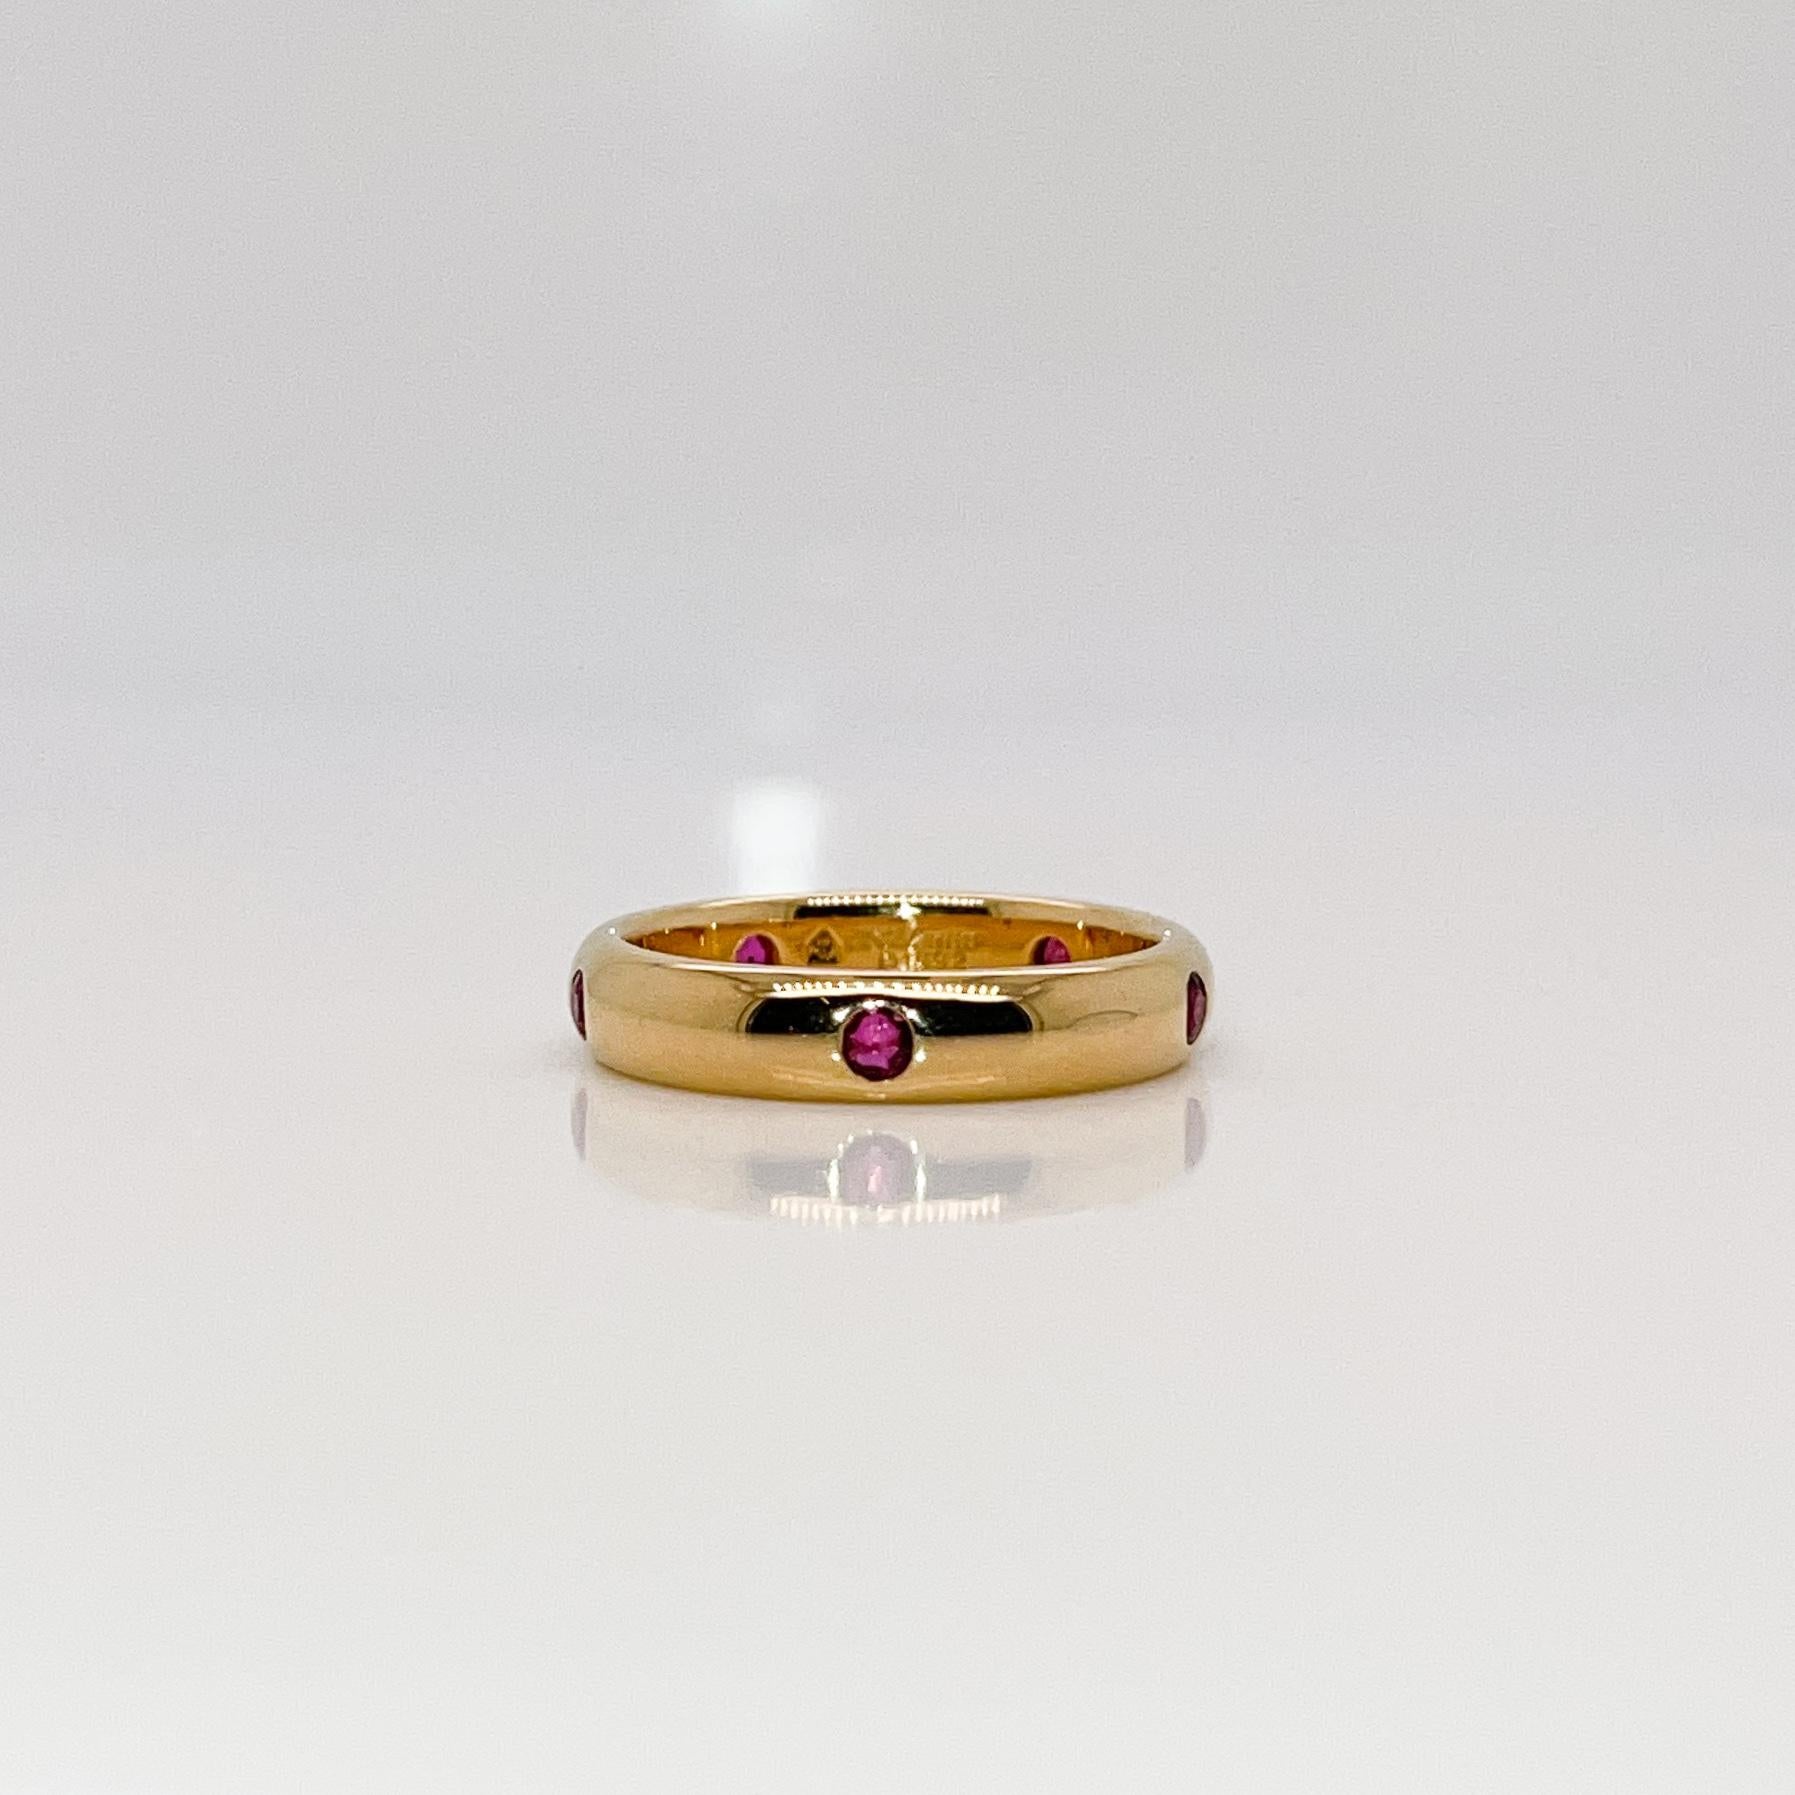 A very fine 'Stella' ring.

By Cartier.

In 18K yellow gold & flush set with round cut rubies.

Simply great design! 

Date:
20th Century

Overall Condition:
It is in overall good, as-pictured, used estate condition with some fine & light surface